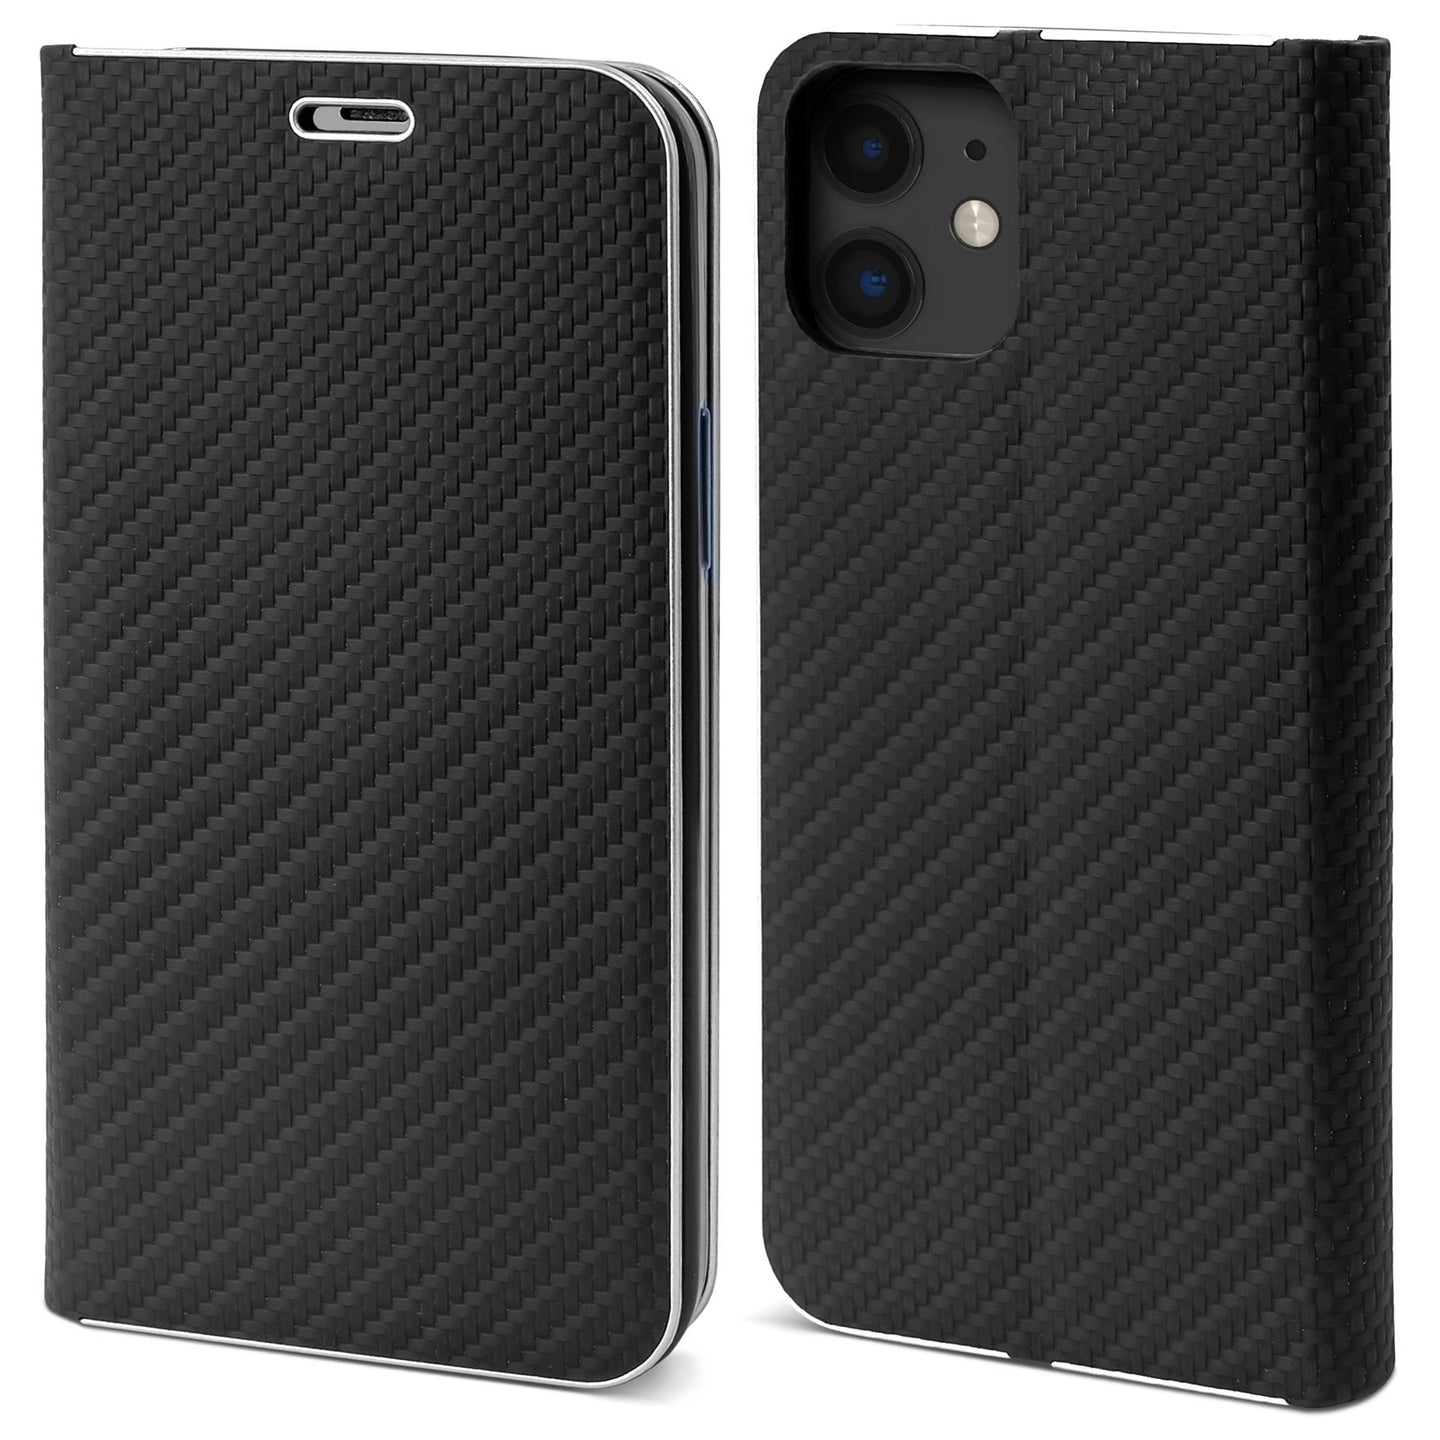 Moozy Wallet Case for iPhone 12 mini, Black Carbon – Metallic Edge Protection Magnetic Closure Flip Cover with Card Holder